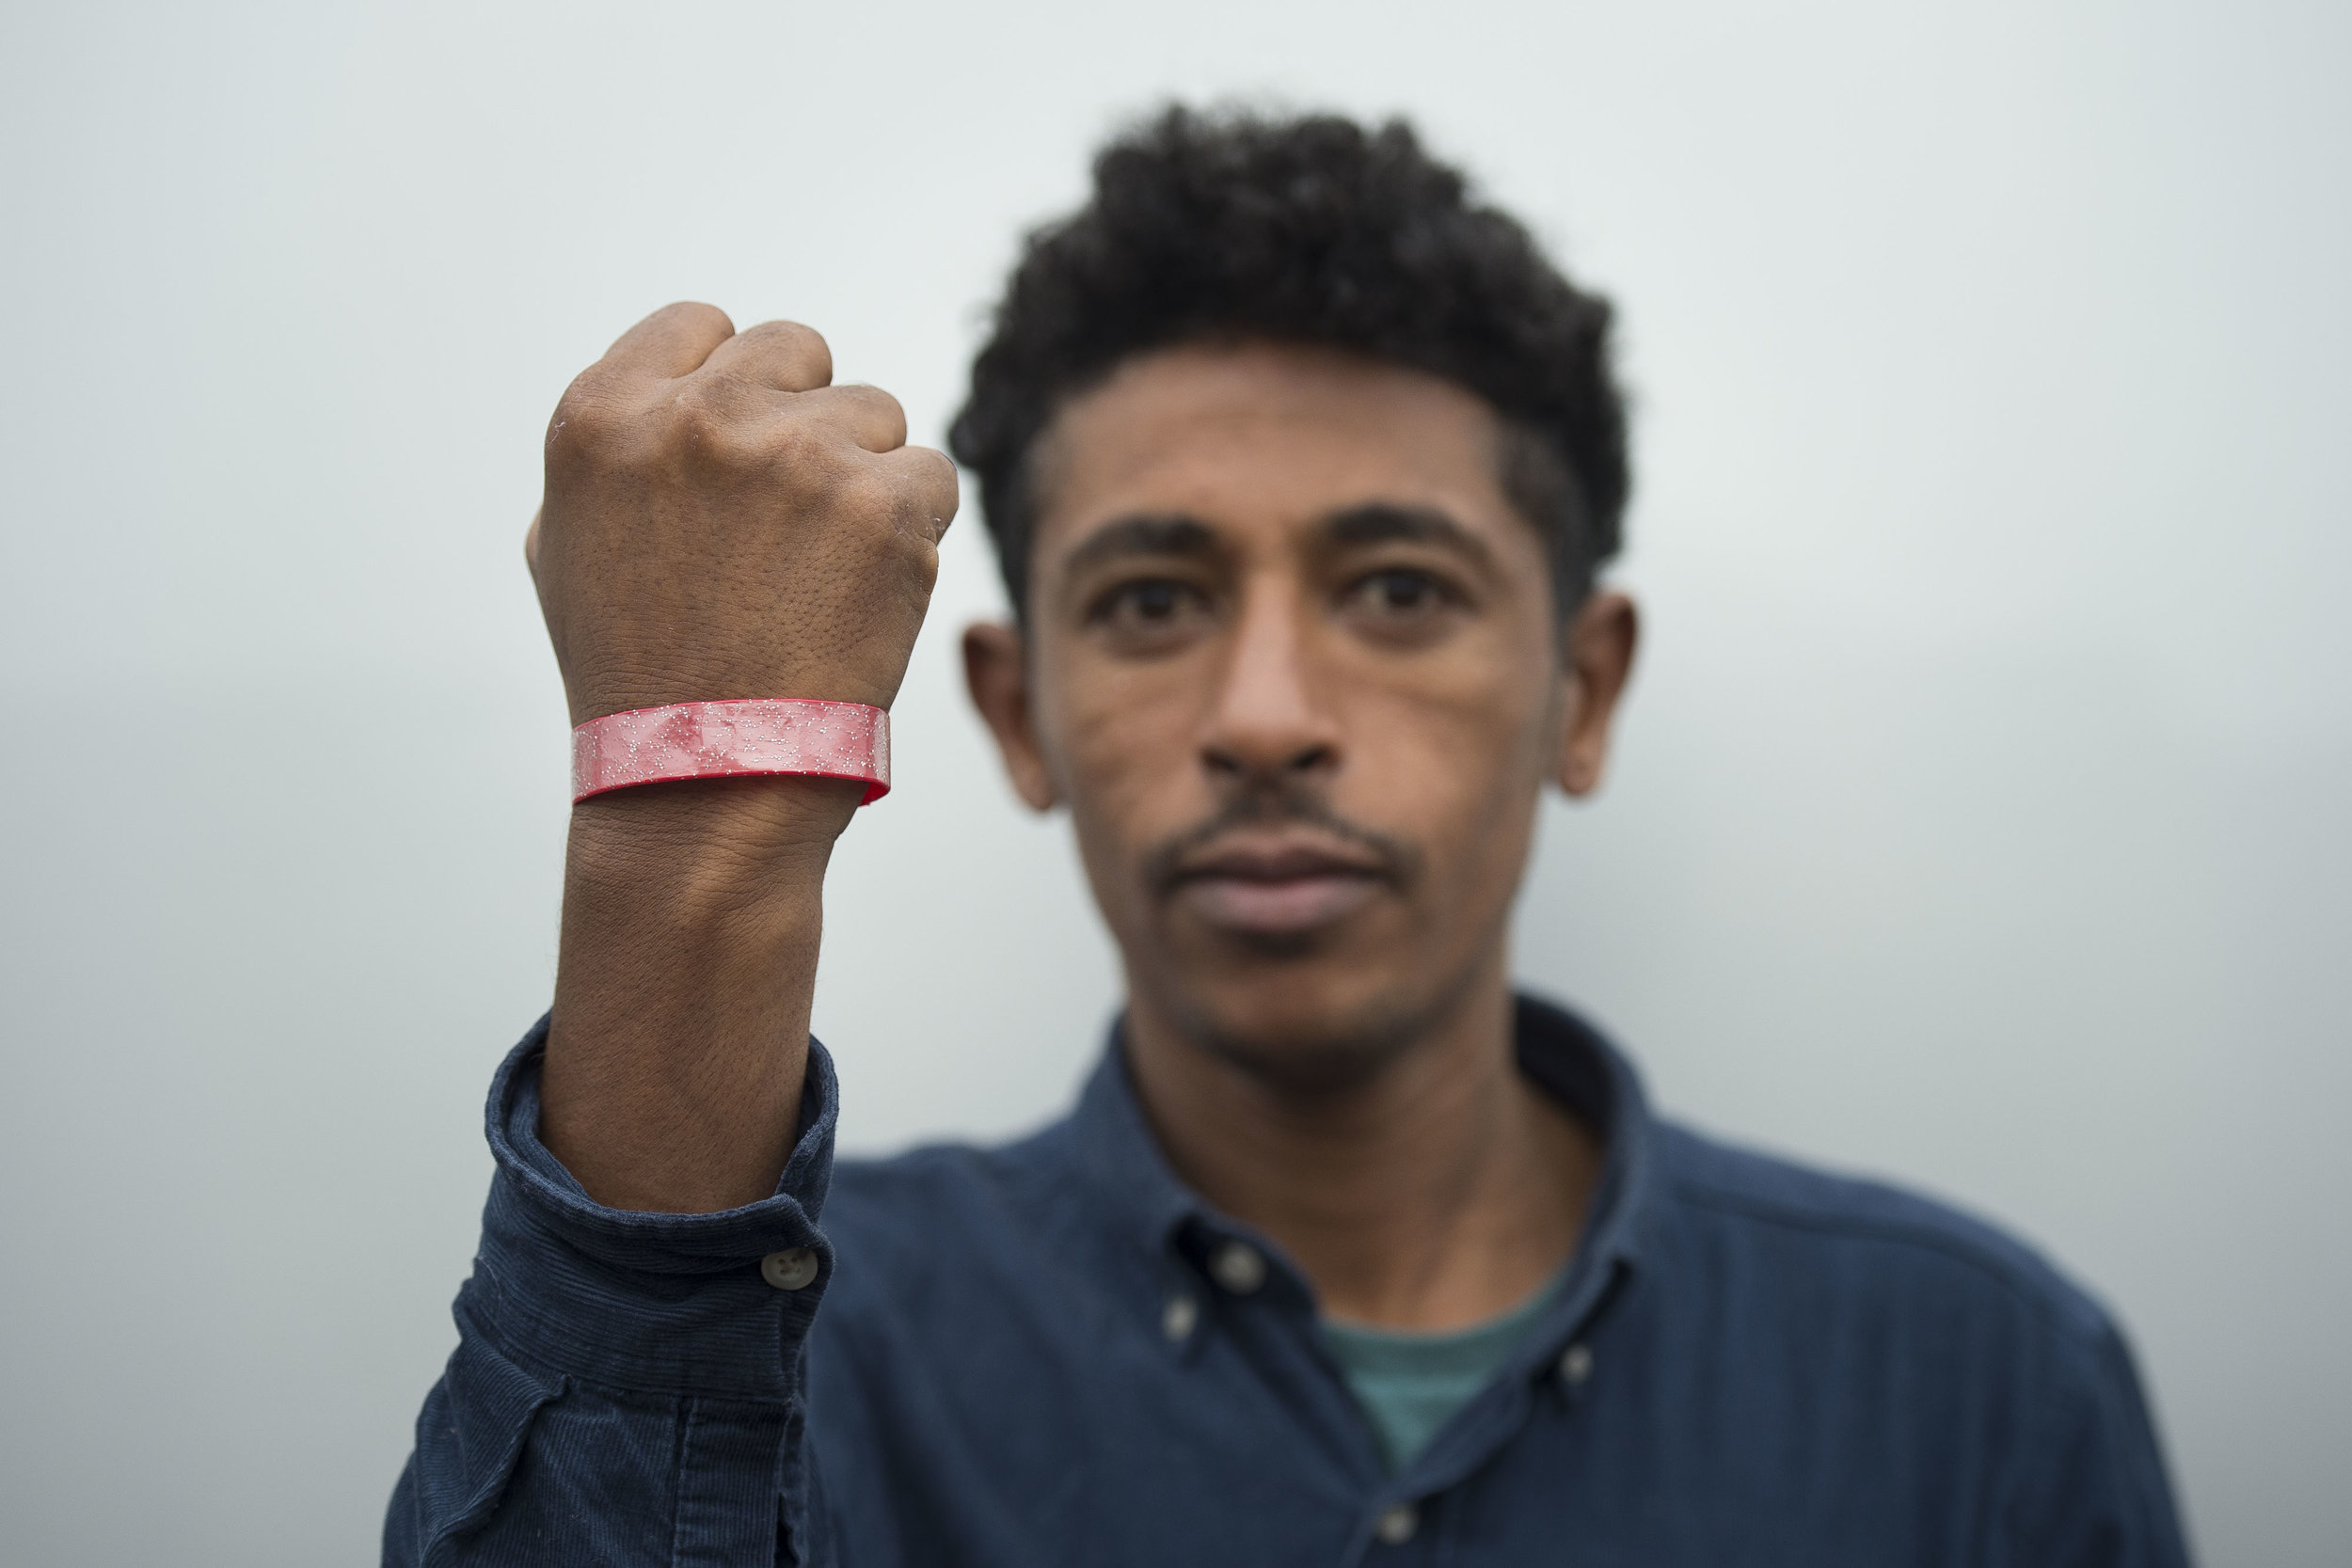  Asylum seekers staying at Lynx House on Newport Road in Cardiff, South Wales, have been given brightly coloured wrist bands to wear in order to claim food.

Picture shows Zekaryas Eyob of Eritrea who was made to wear a wrist band.

PIC Matthew Horwo